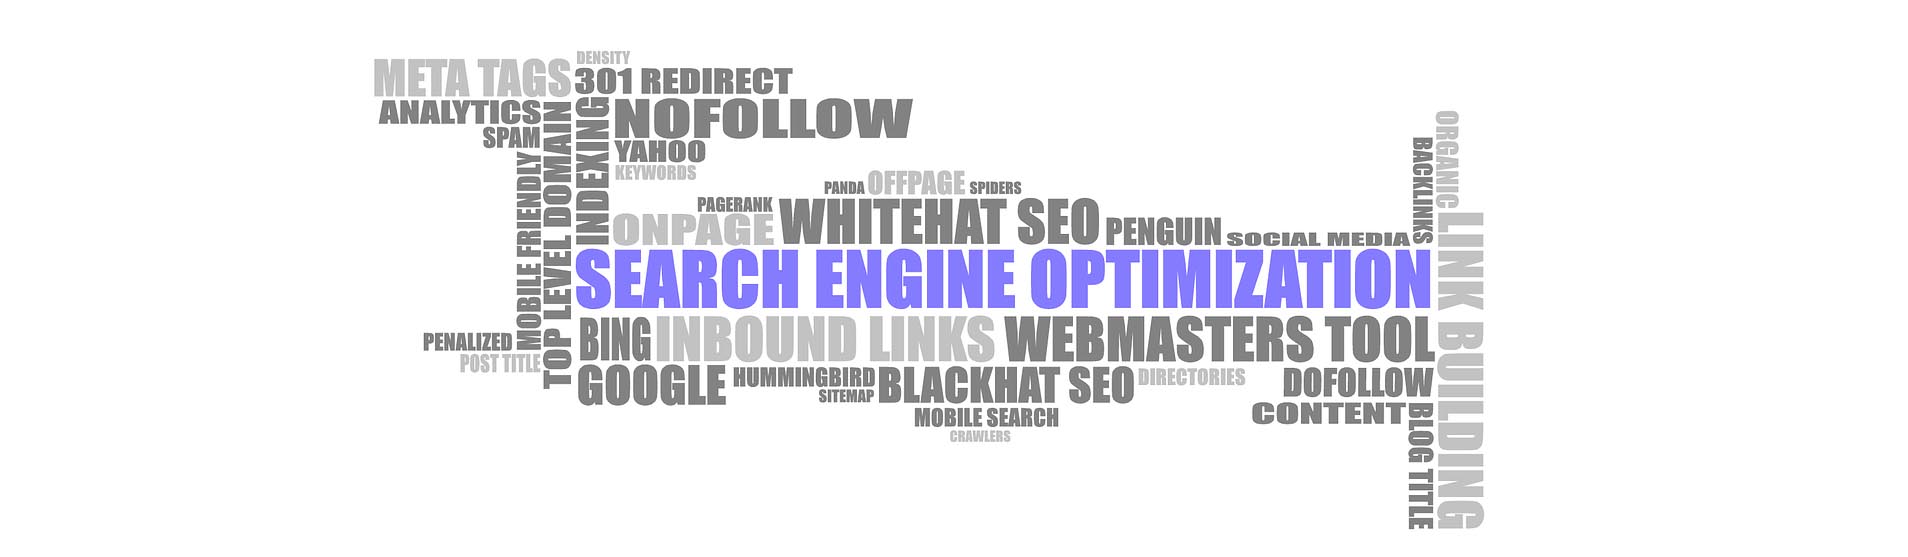 search engine optimisation consultants Waterford 